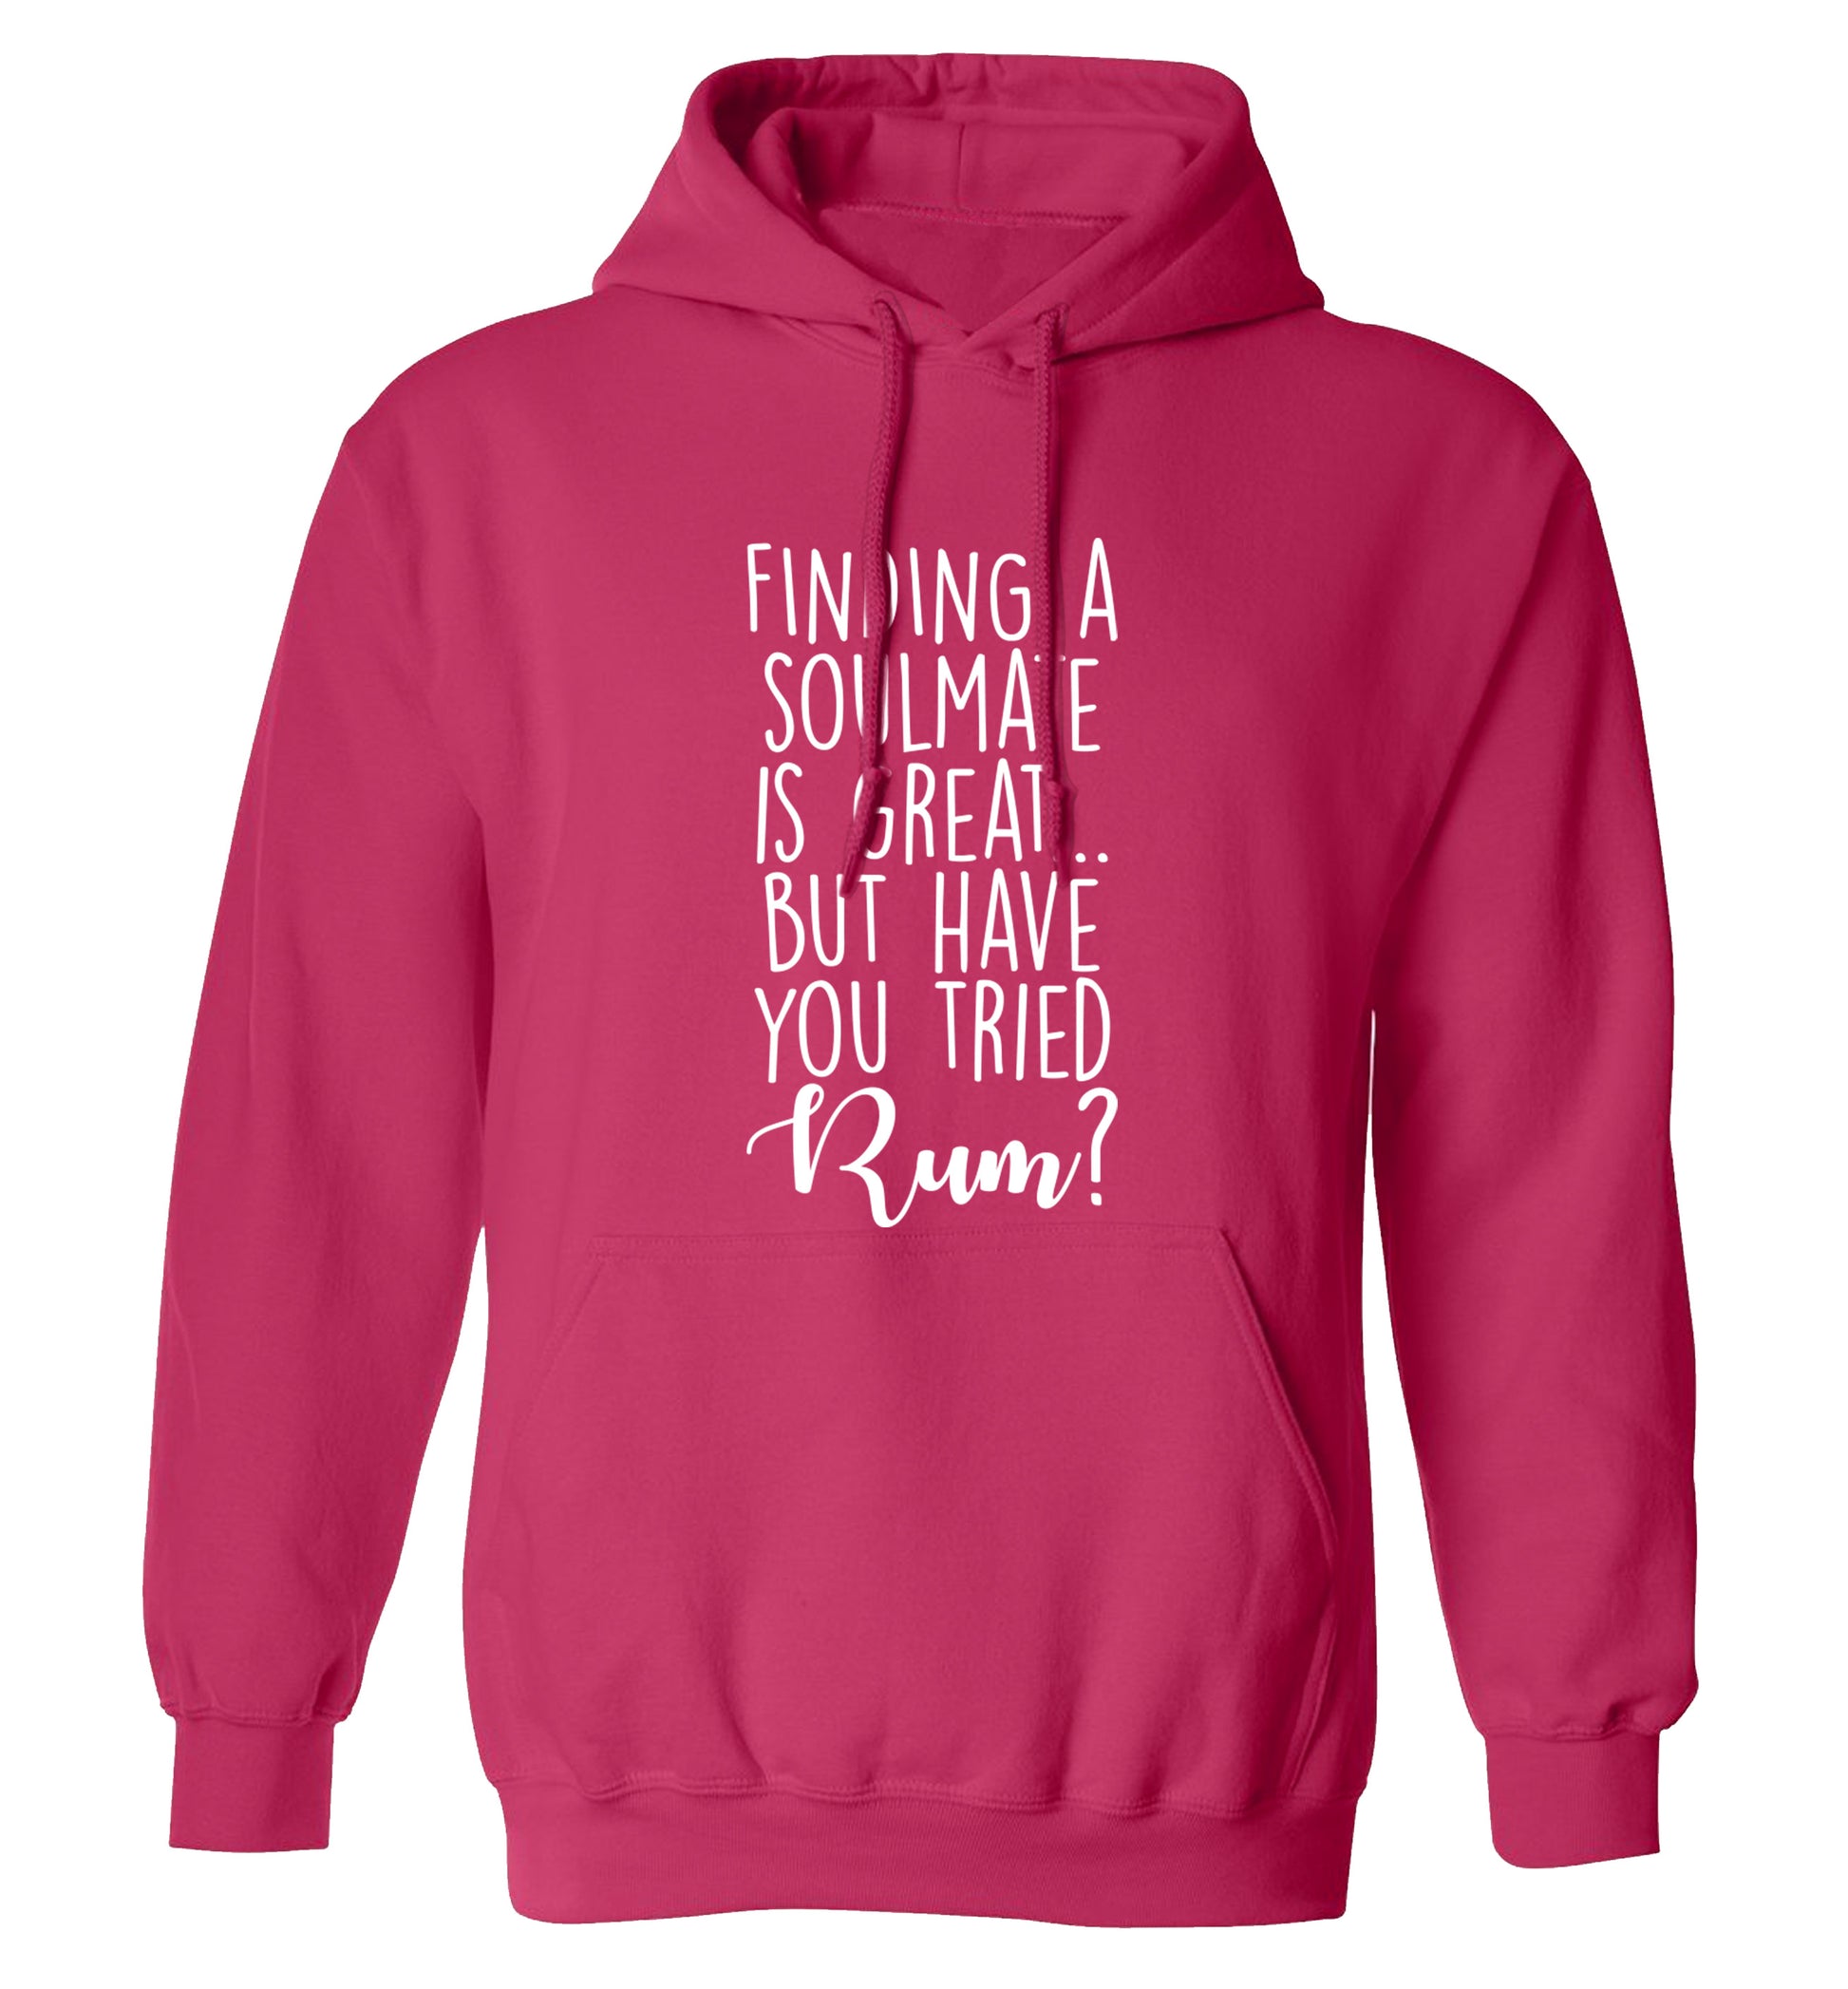 Finding a soulmate is great but have you tried rum? adults unisex pink hoodie 2XL